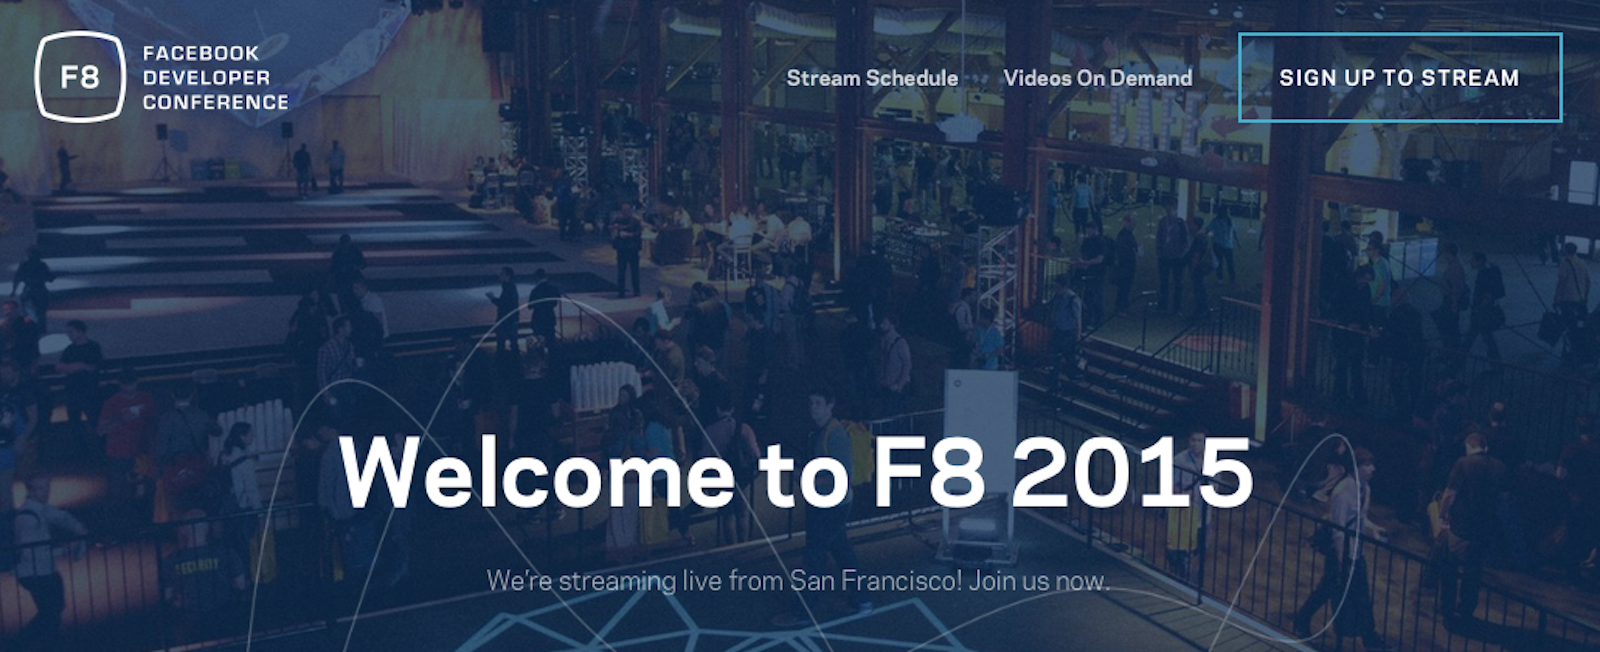 4 Quick Thoughts on Today’s F8 Keynote